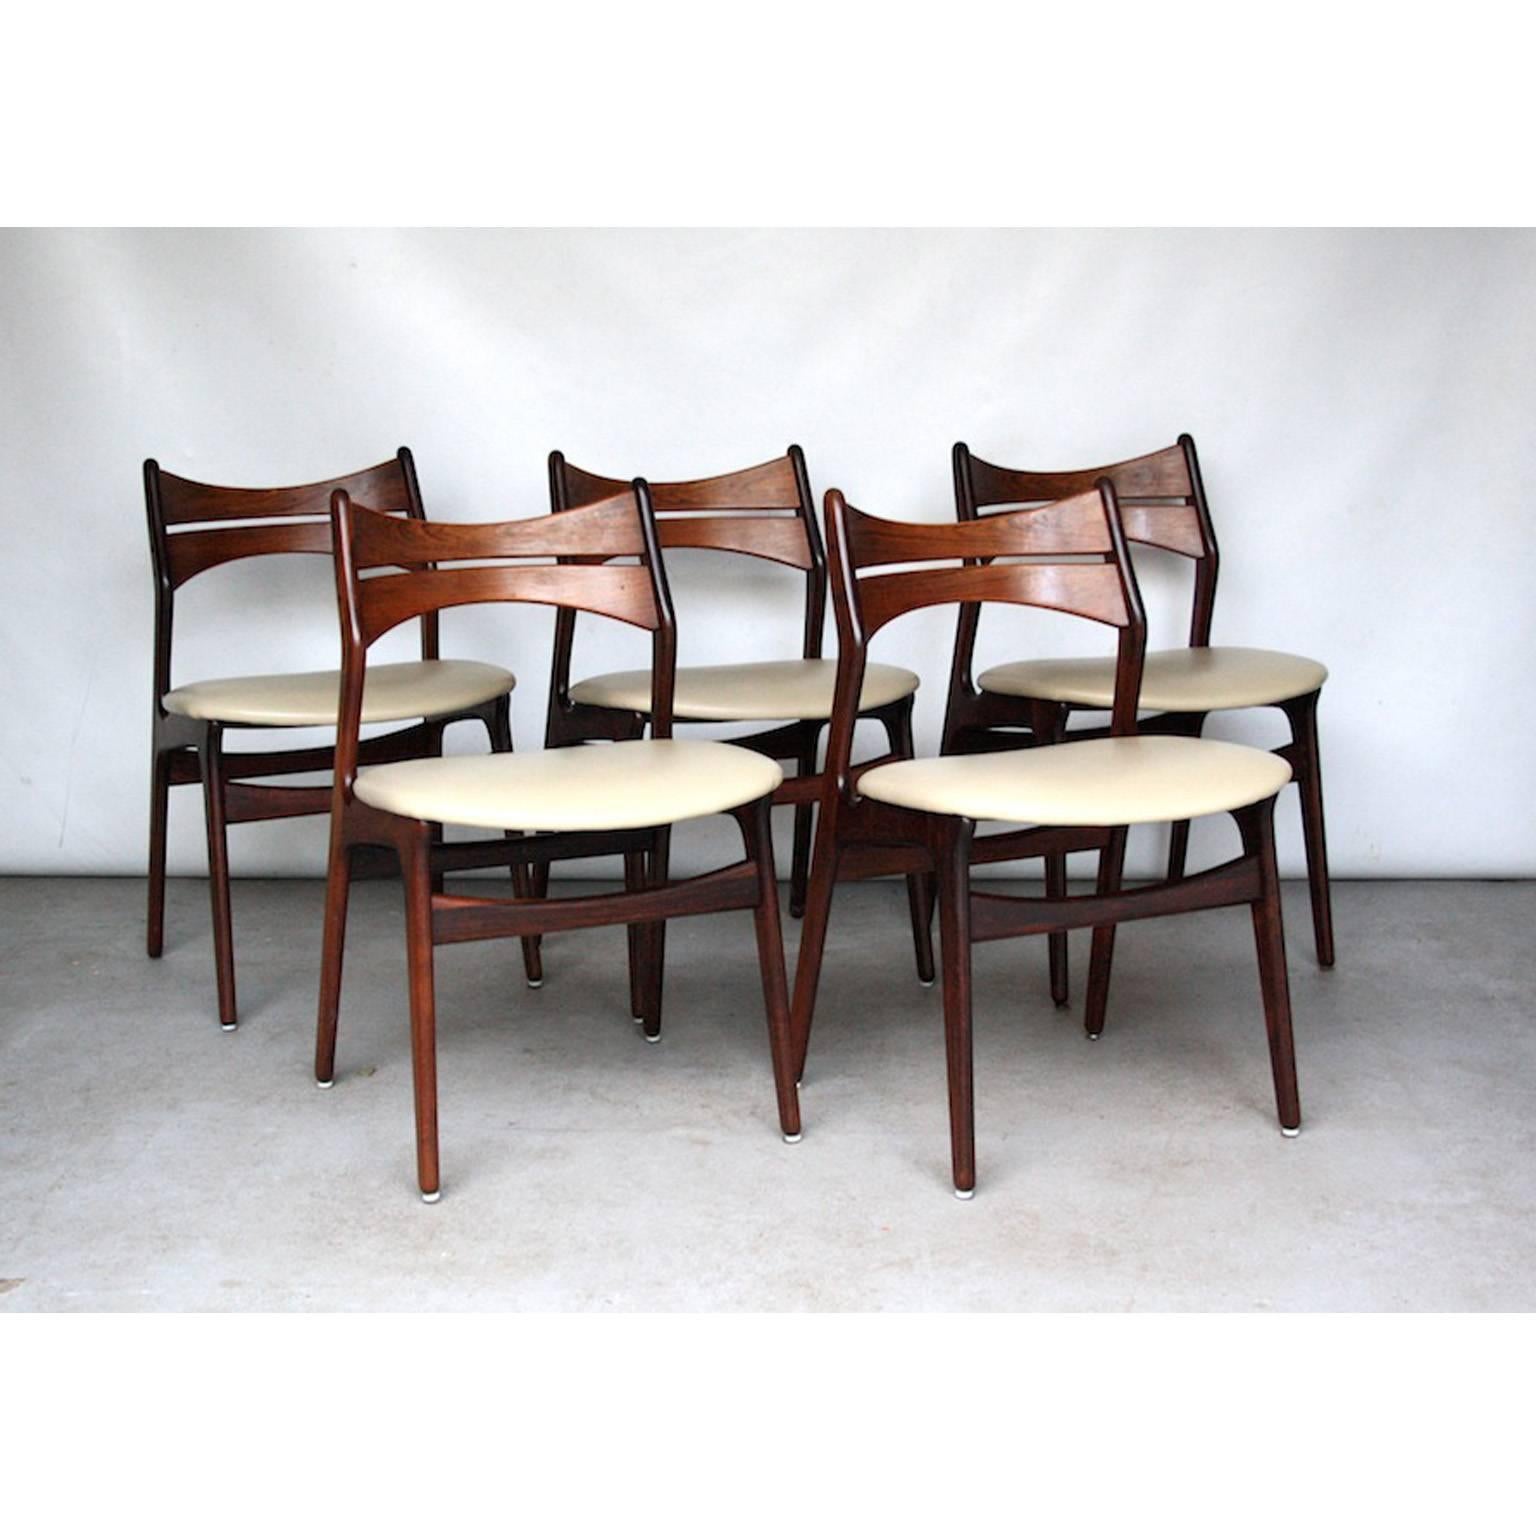 Danish dining chairs in rosewood by Erik Buck. Erik Buck is the creator of many famous bar stools, but also designed dining chairs. These chairs are made of solid rosewood and upholstered in stylish cream colored vinyl.
The chairs are marked with